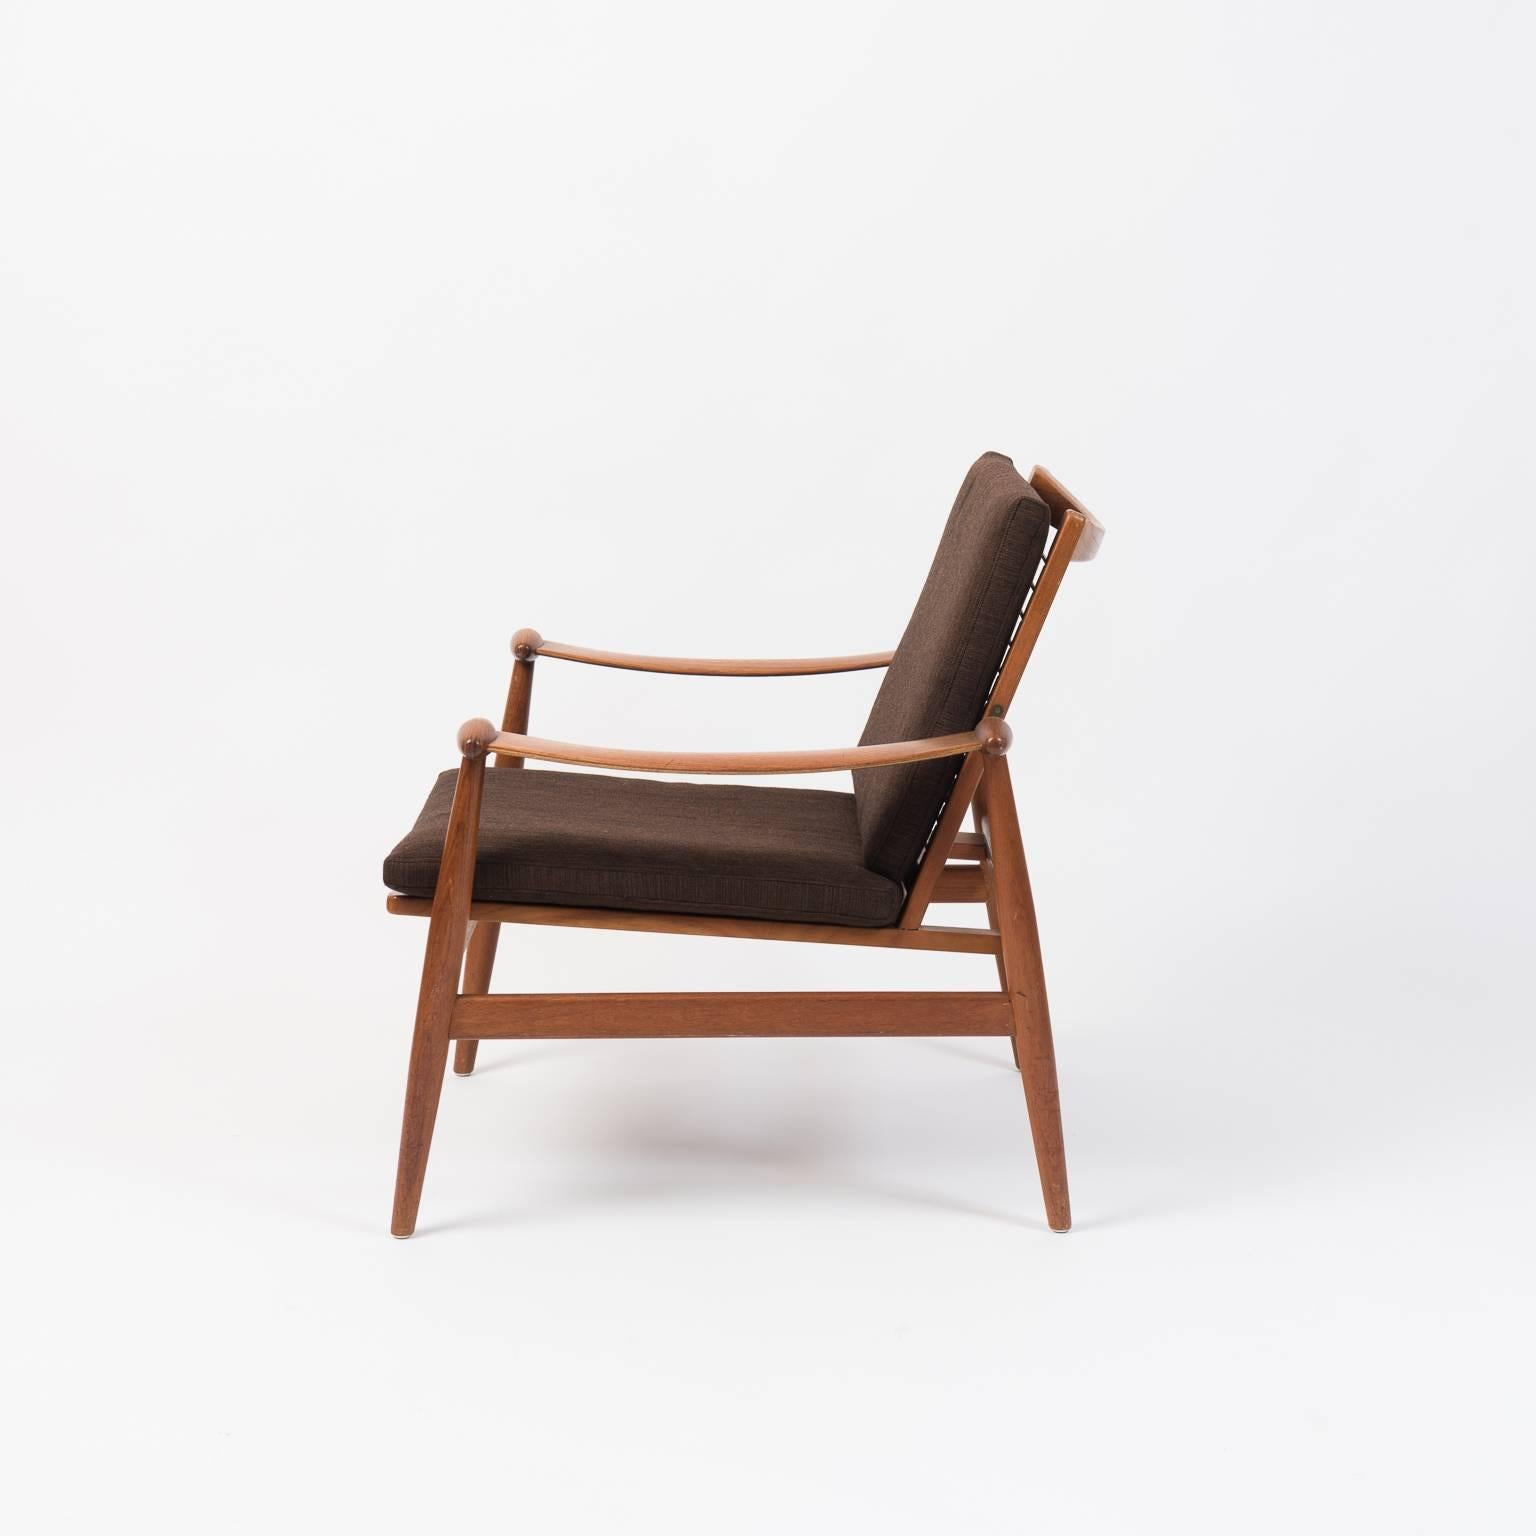 Easy chair designed by Finn Juhl for France & Daverkosen designed during the 1950s. Original condition with a light natural patina. The chair is a great example of the Mid-Century Modern and Scandinavian Modern styles. The teak is in good vintage